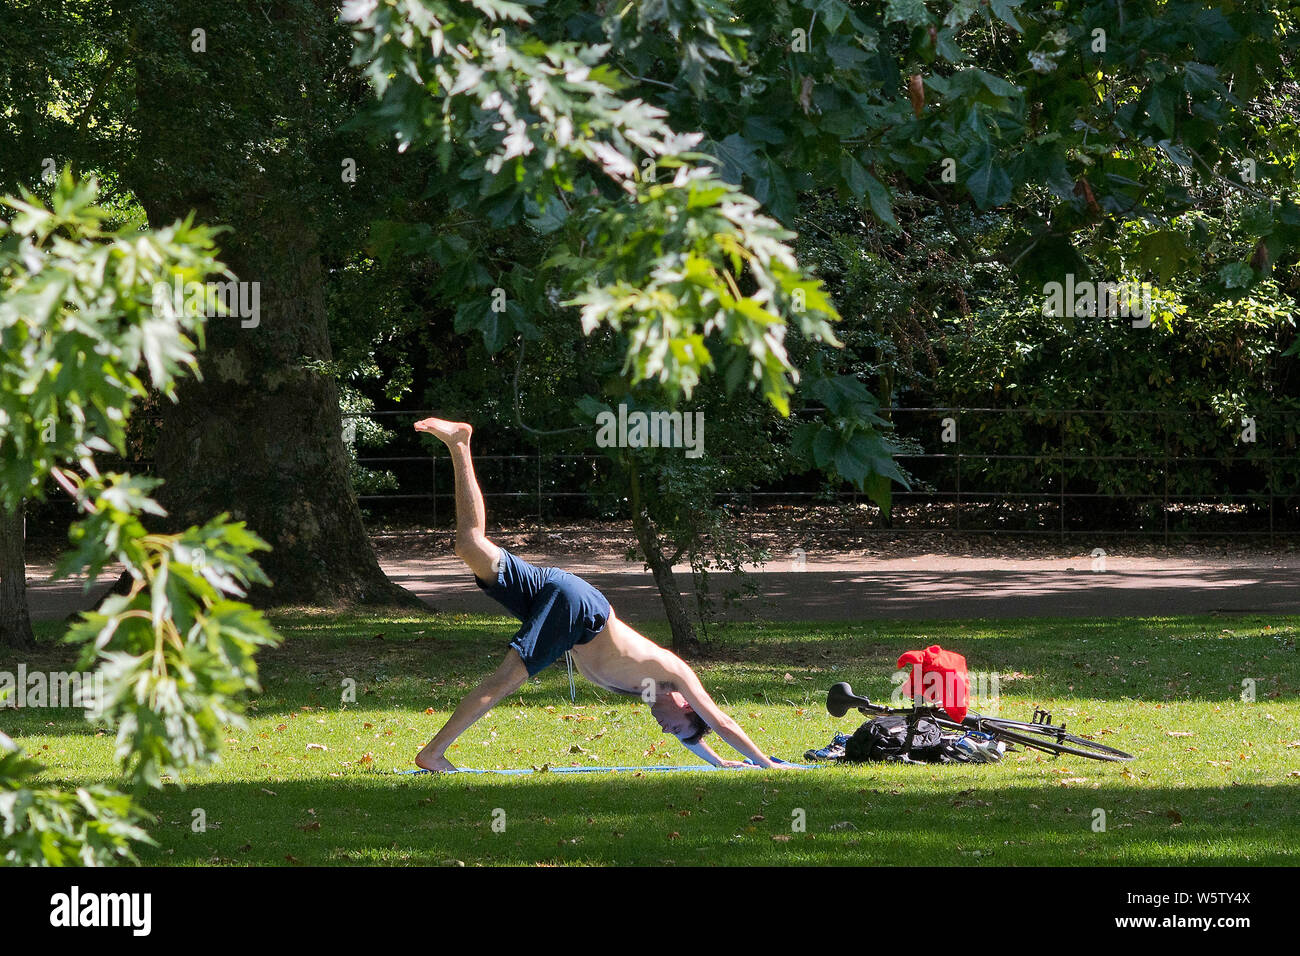 23/07/2019. Battersea, London, UK. People exercise in Battersea Park in London during a heatwave across the UK. Stock Photo